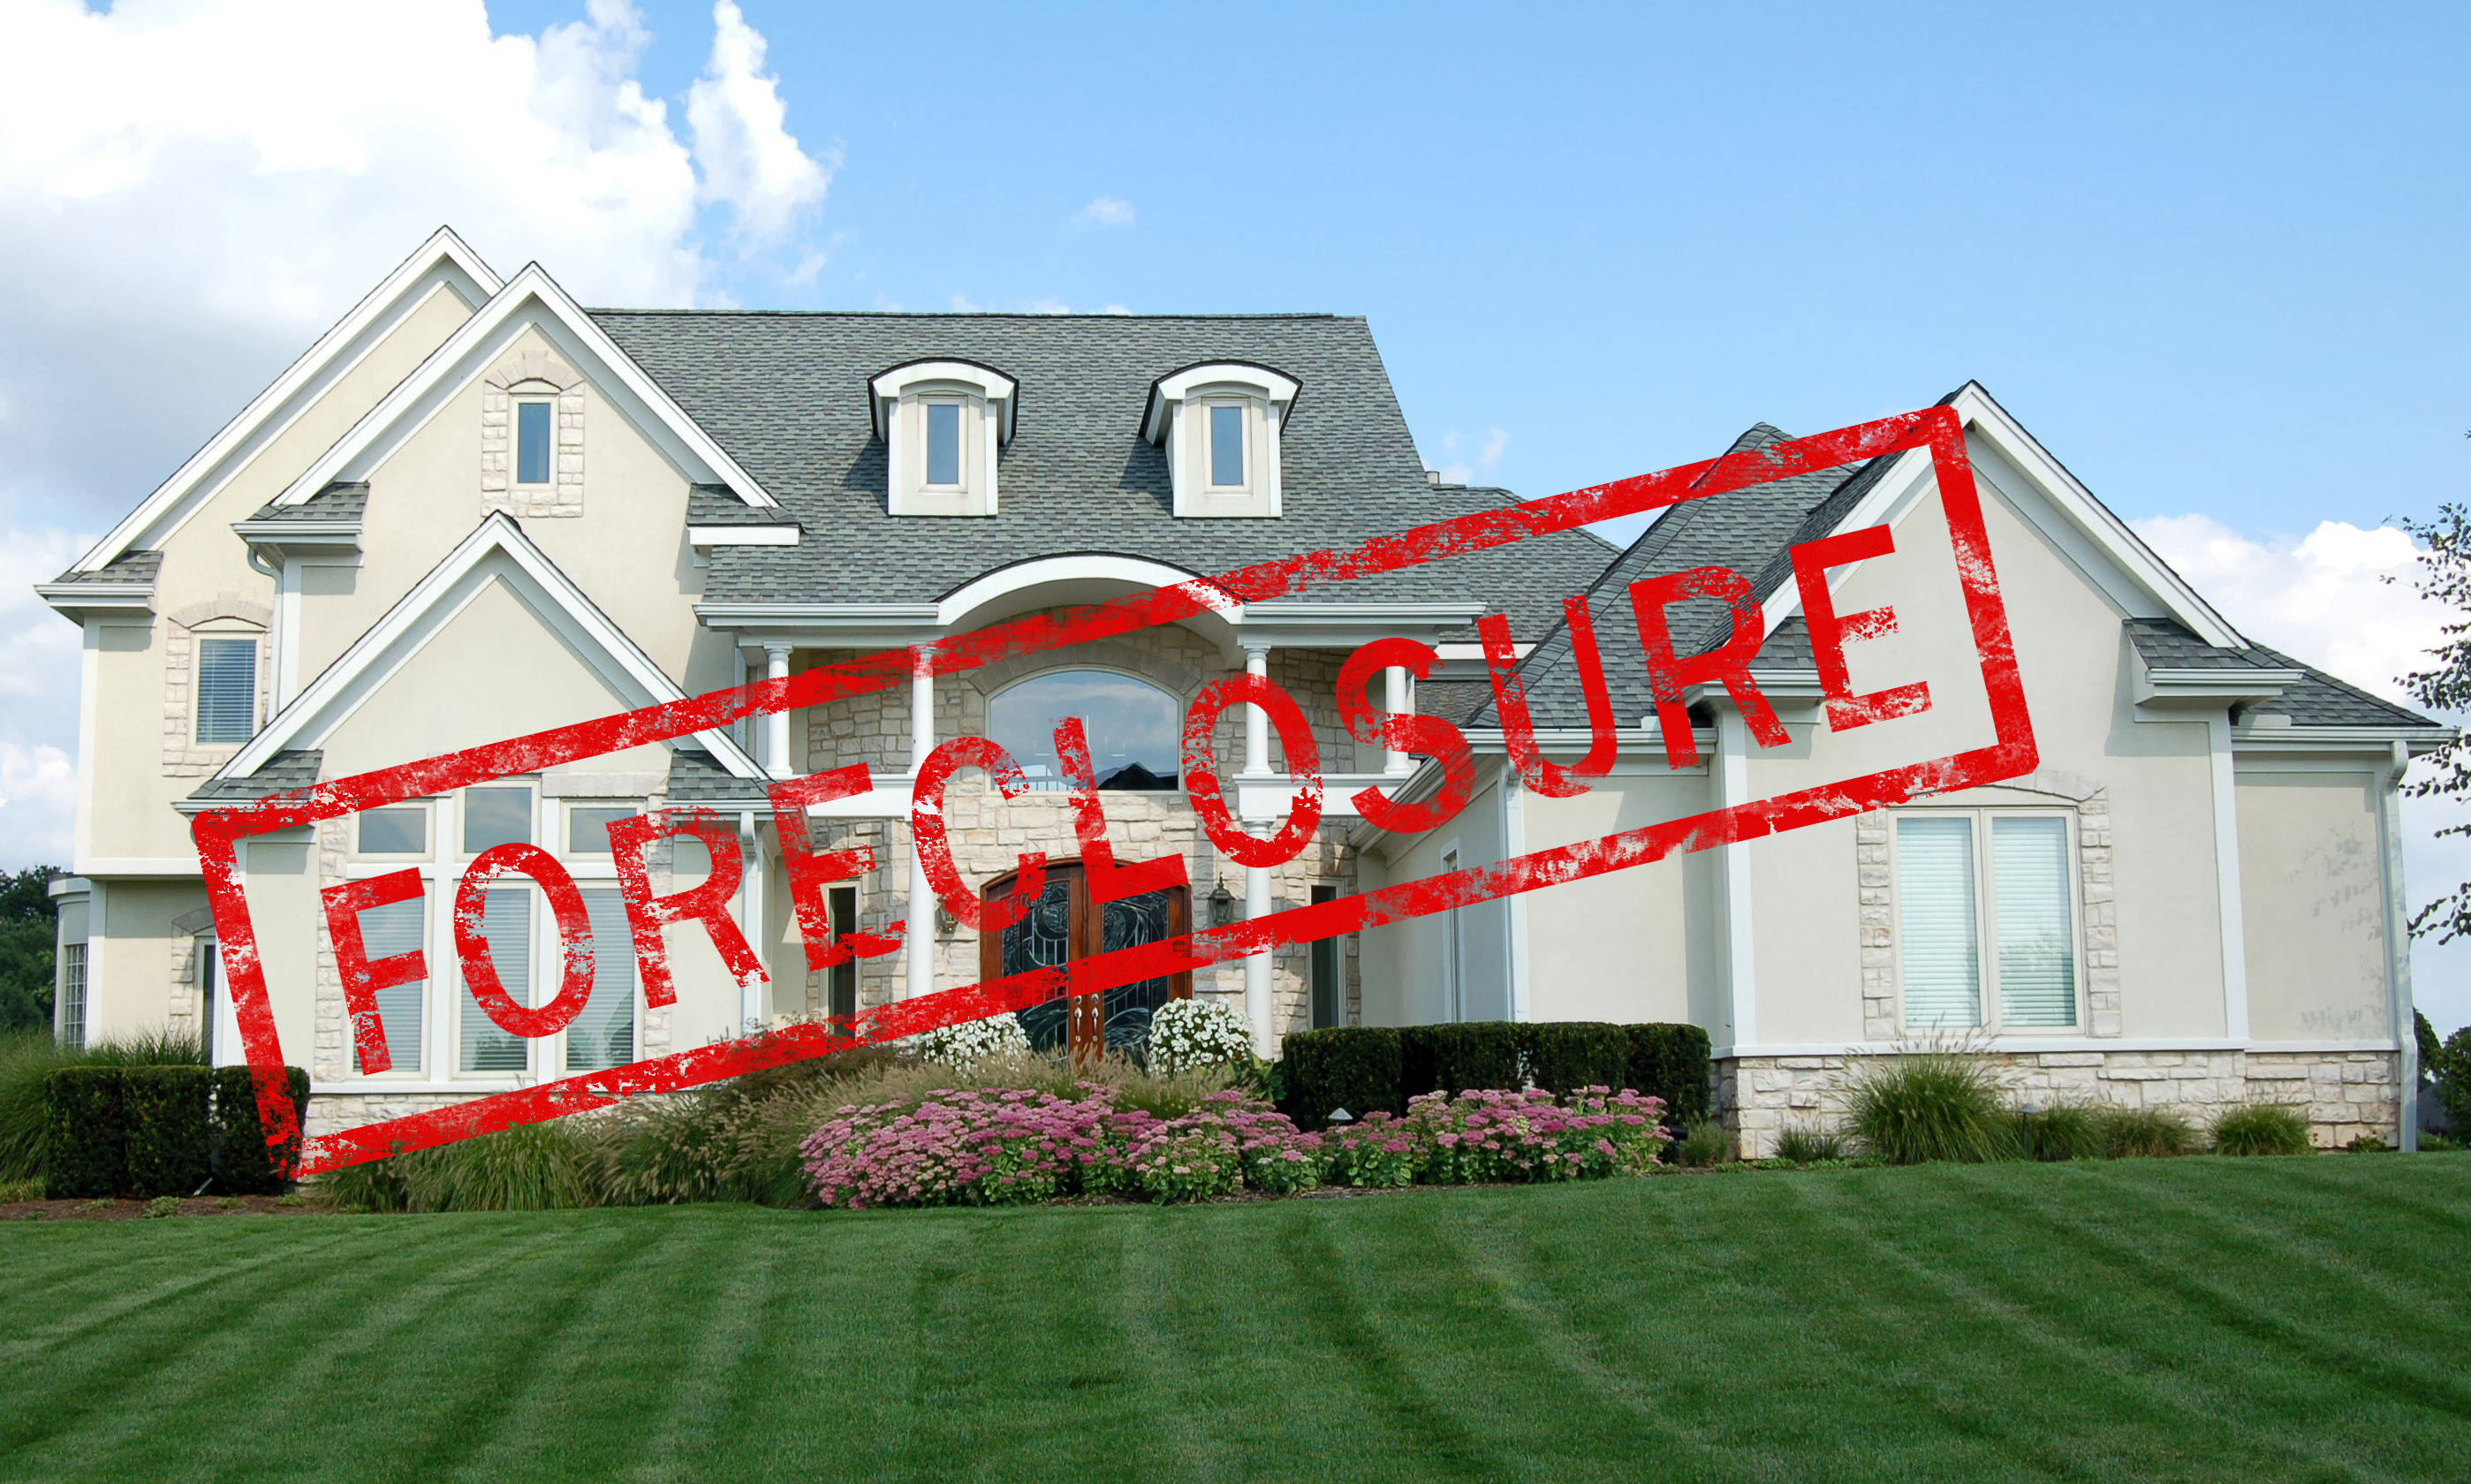 Call Maffeo-Kelly Appraisal Co., LLC to order valuations for Monmouth foreclosures